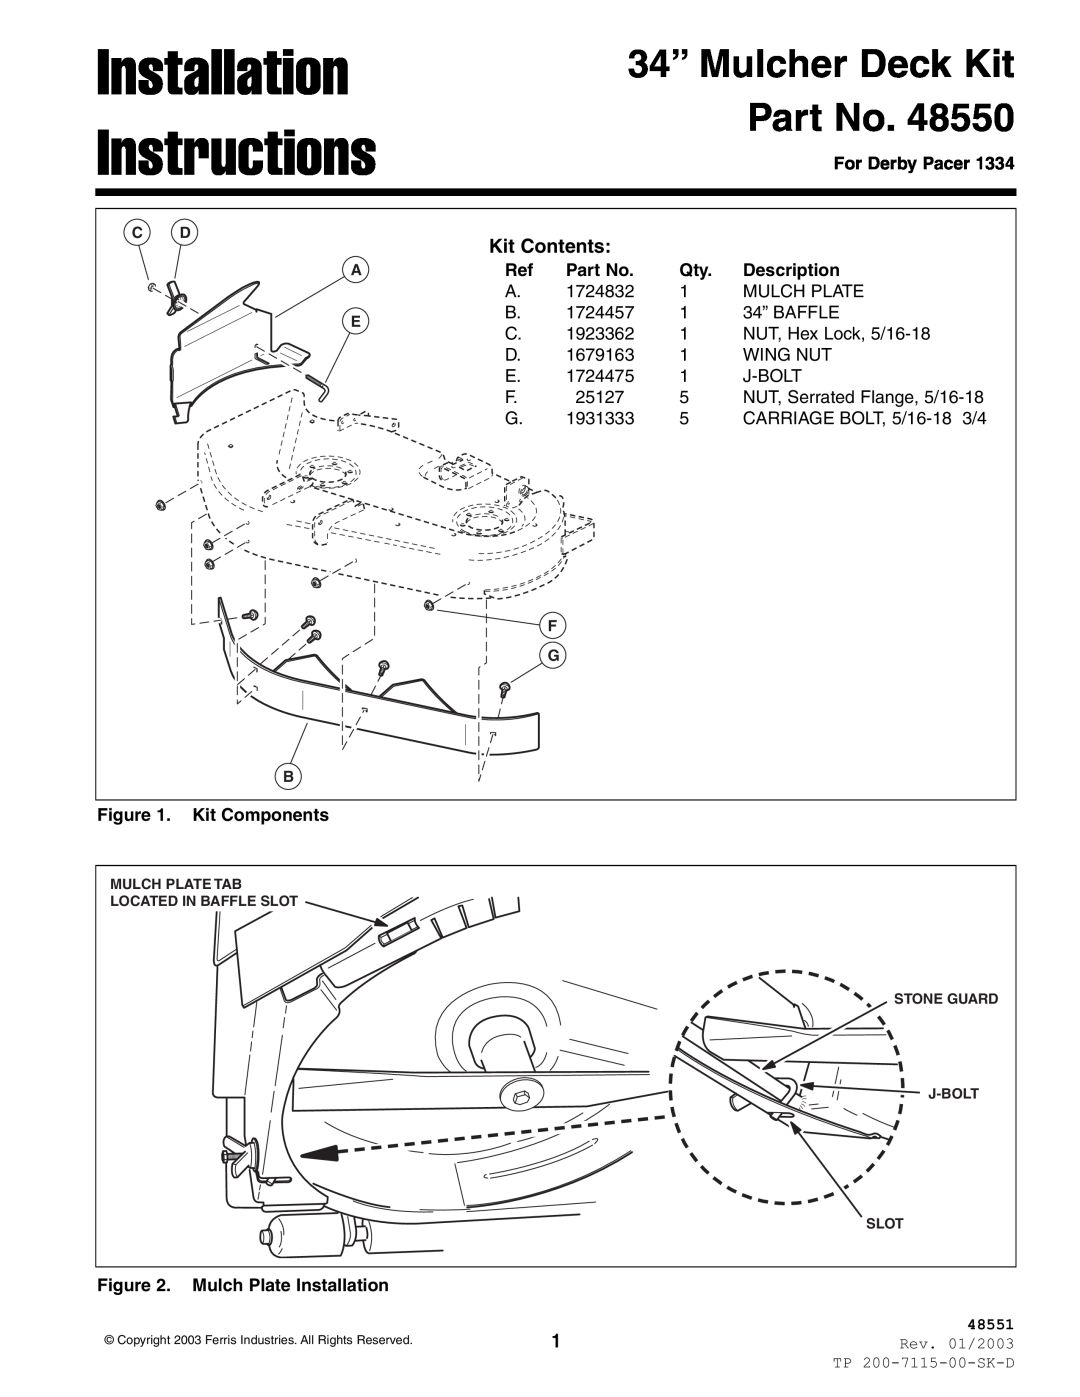 Ferris Industries 48550 installation instructions For Derby Pacer, Description, Kit Components, Mulch Plate Installation 